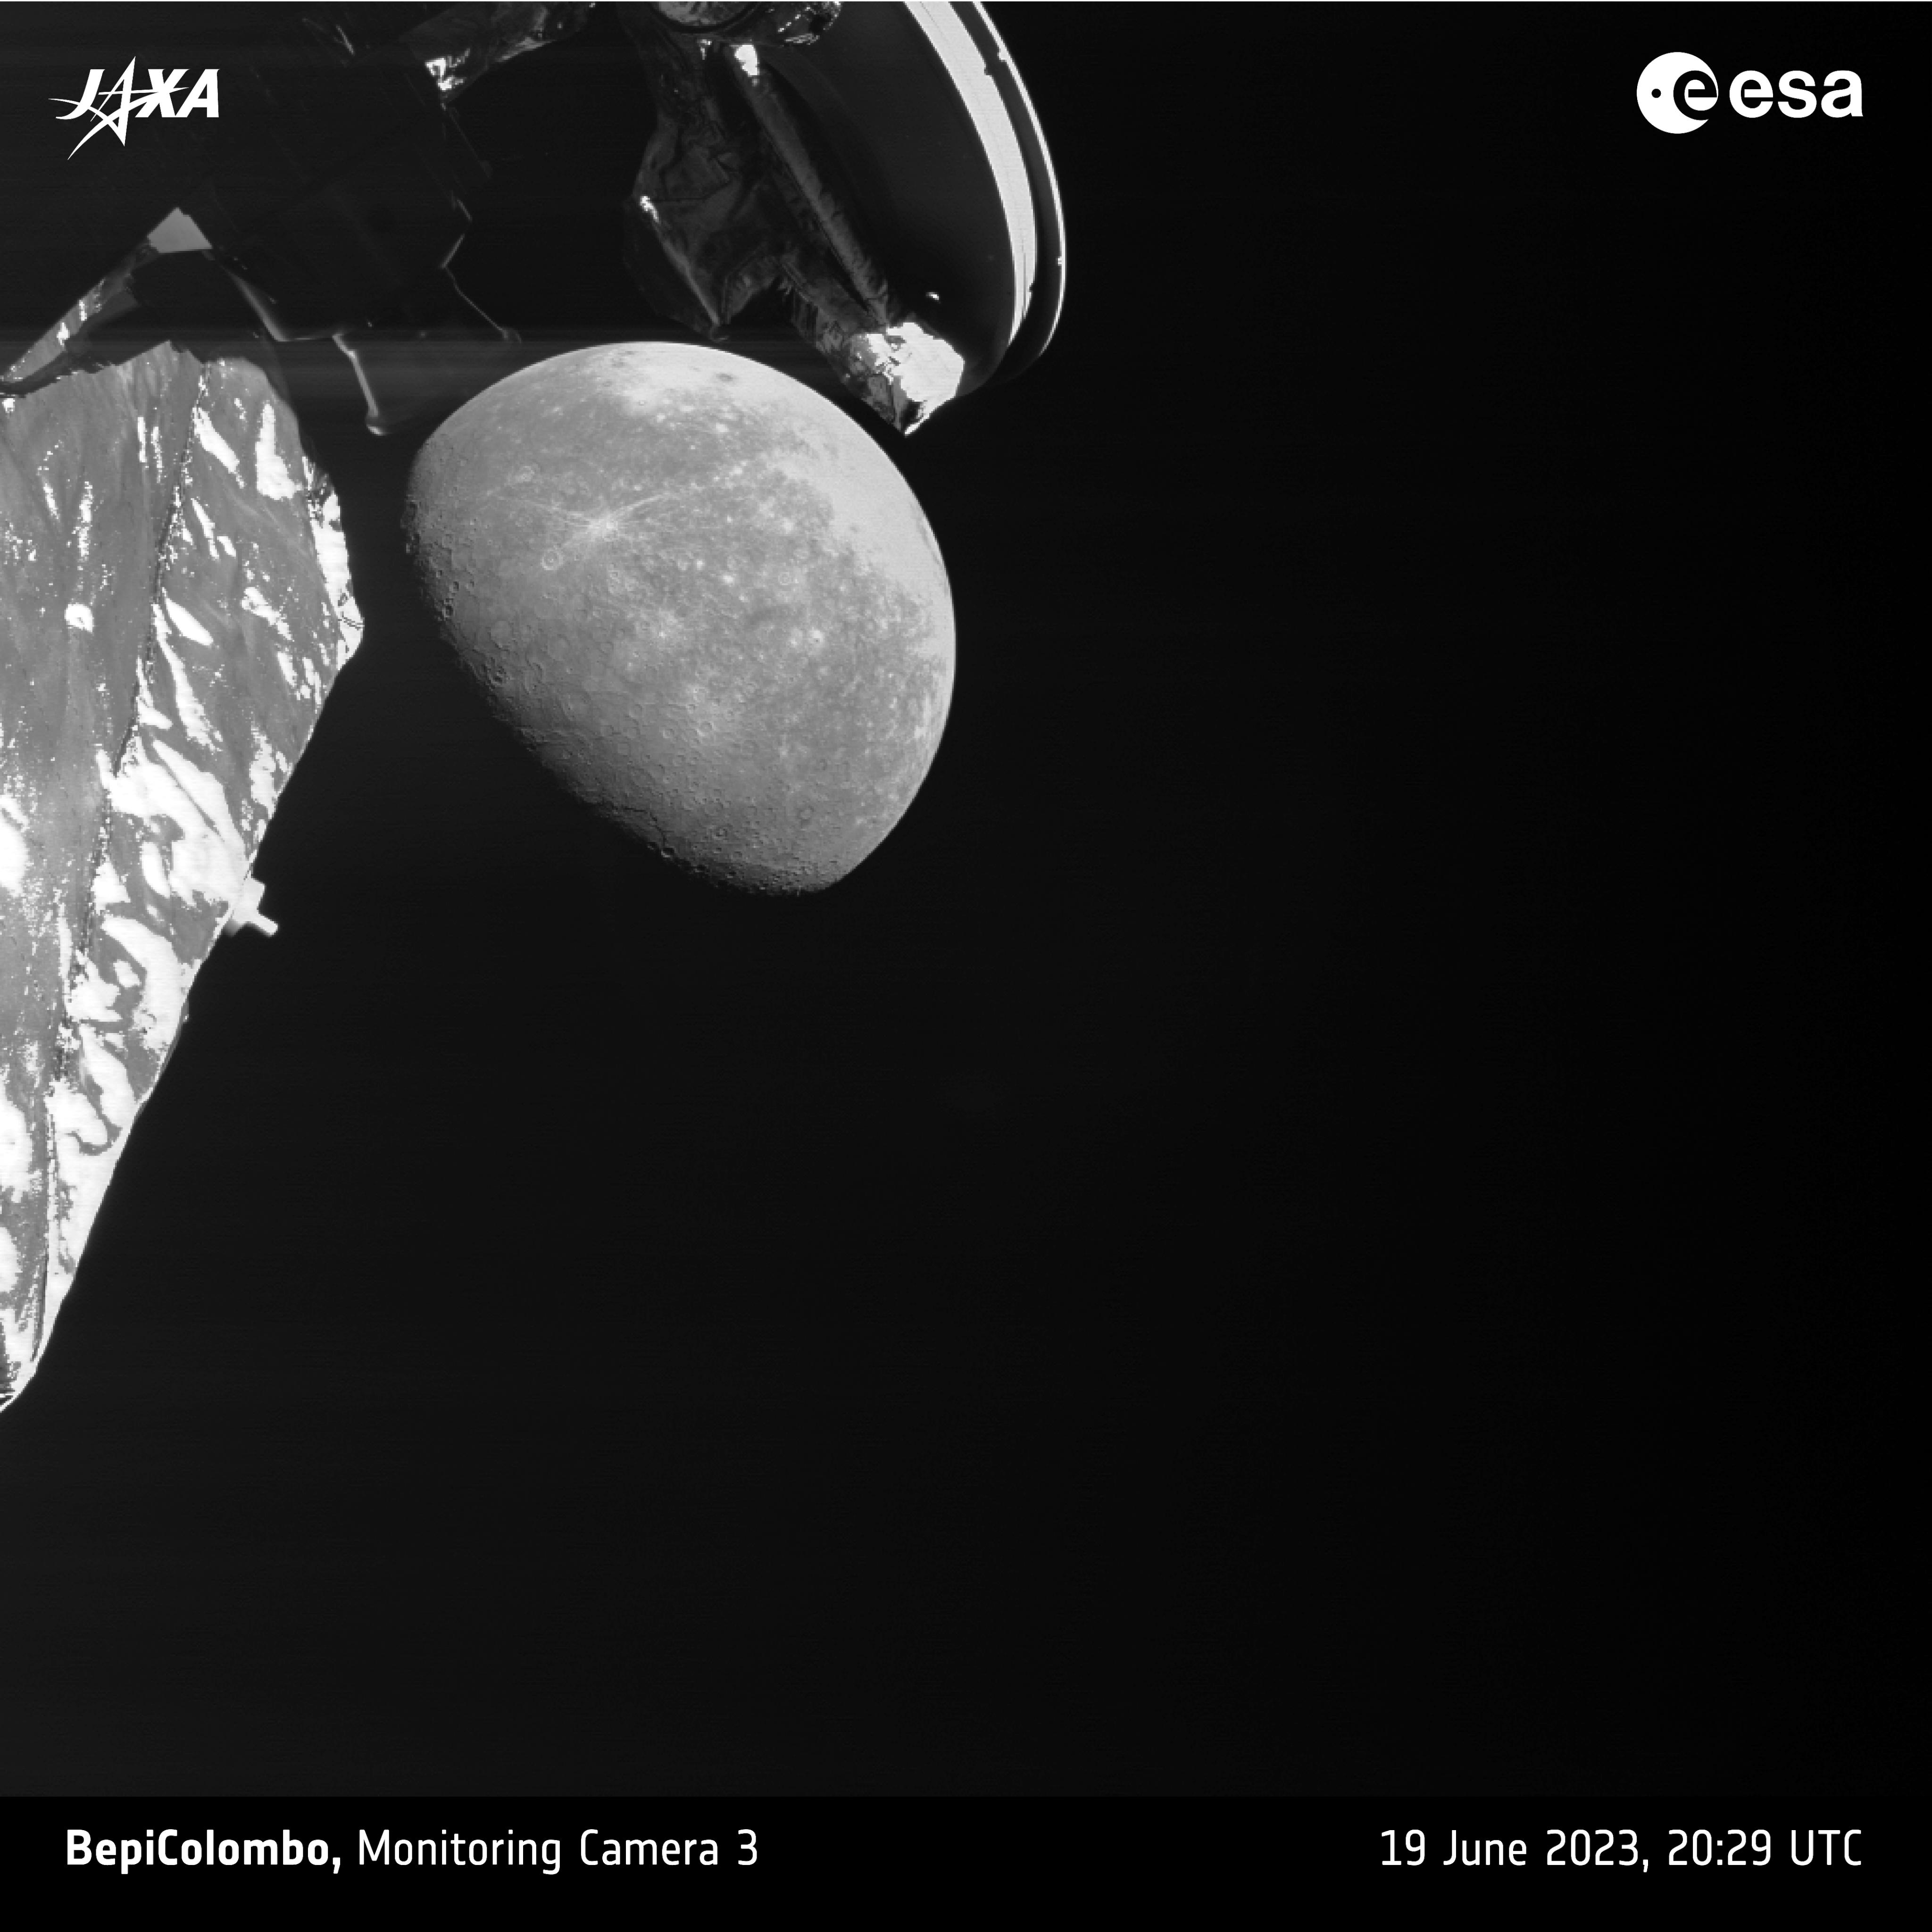 Photo of Mercury taken by BepiColombo during the third gravity assist maneuver.jpg